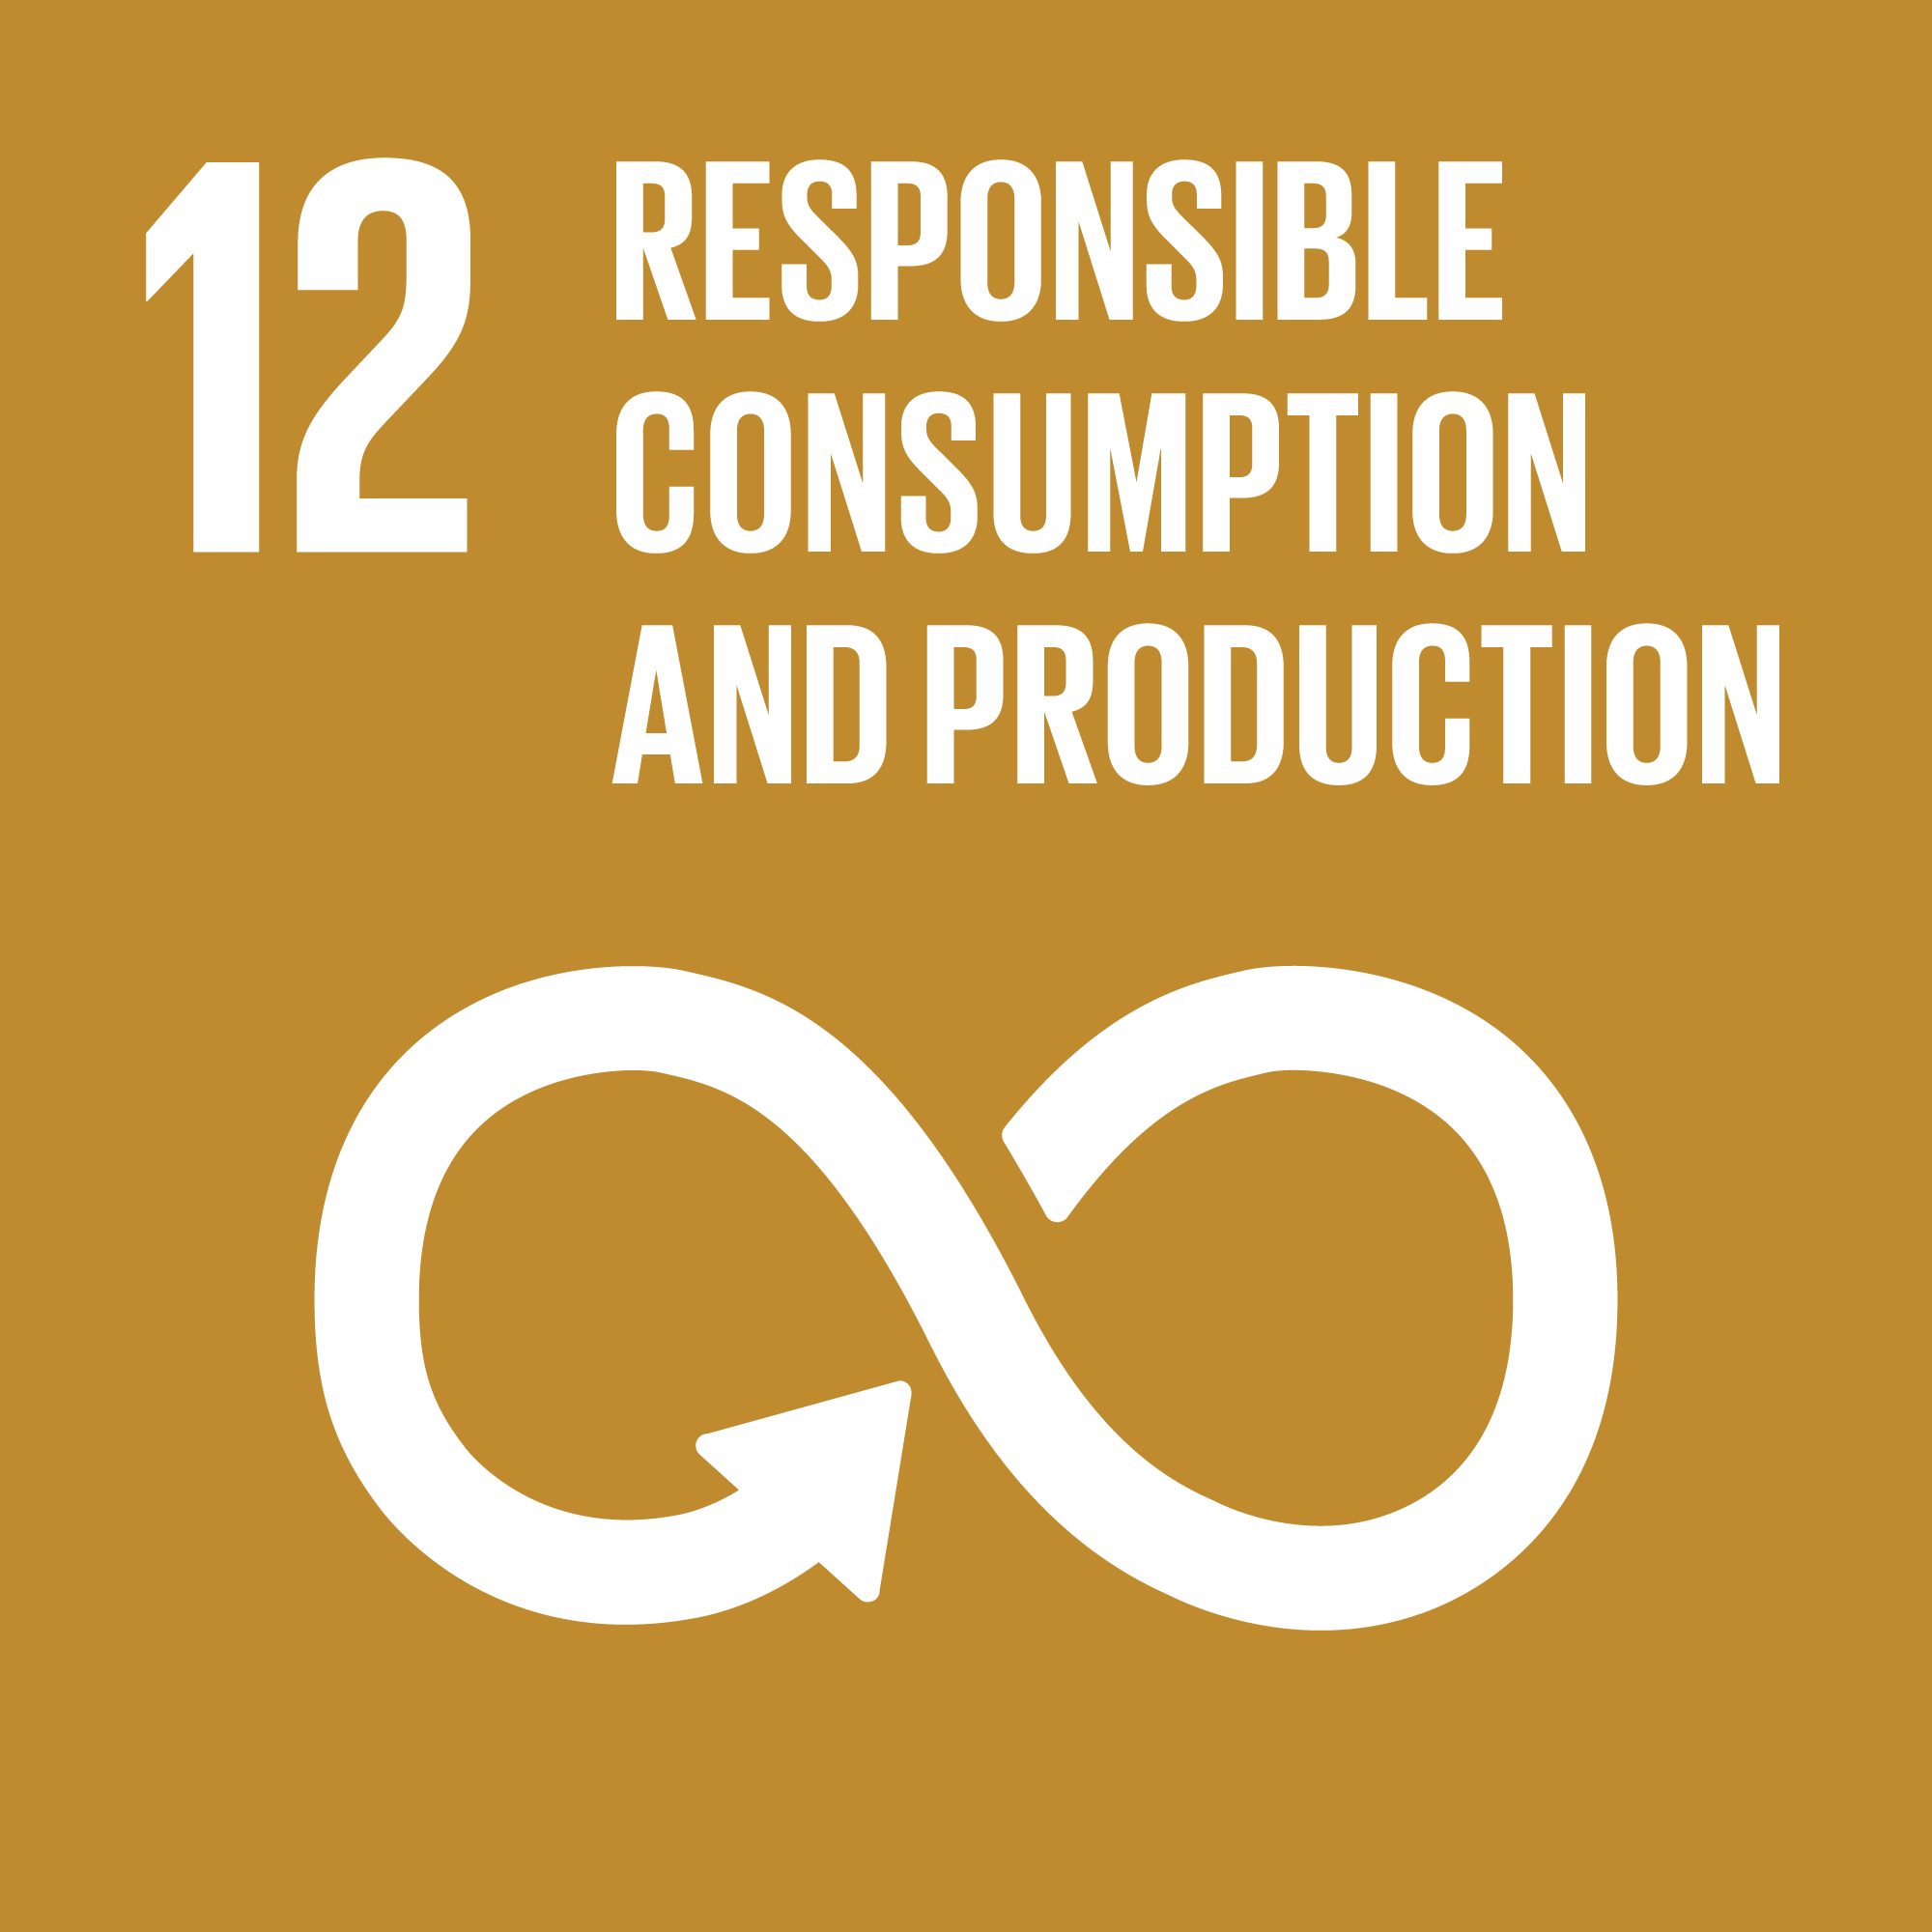 Brown icon for Goal 12 of the 17 Sustainable Development Goals, "Responsible consumption and production."